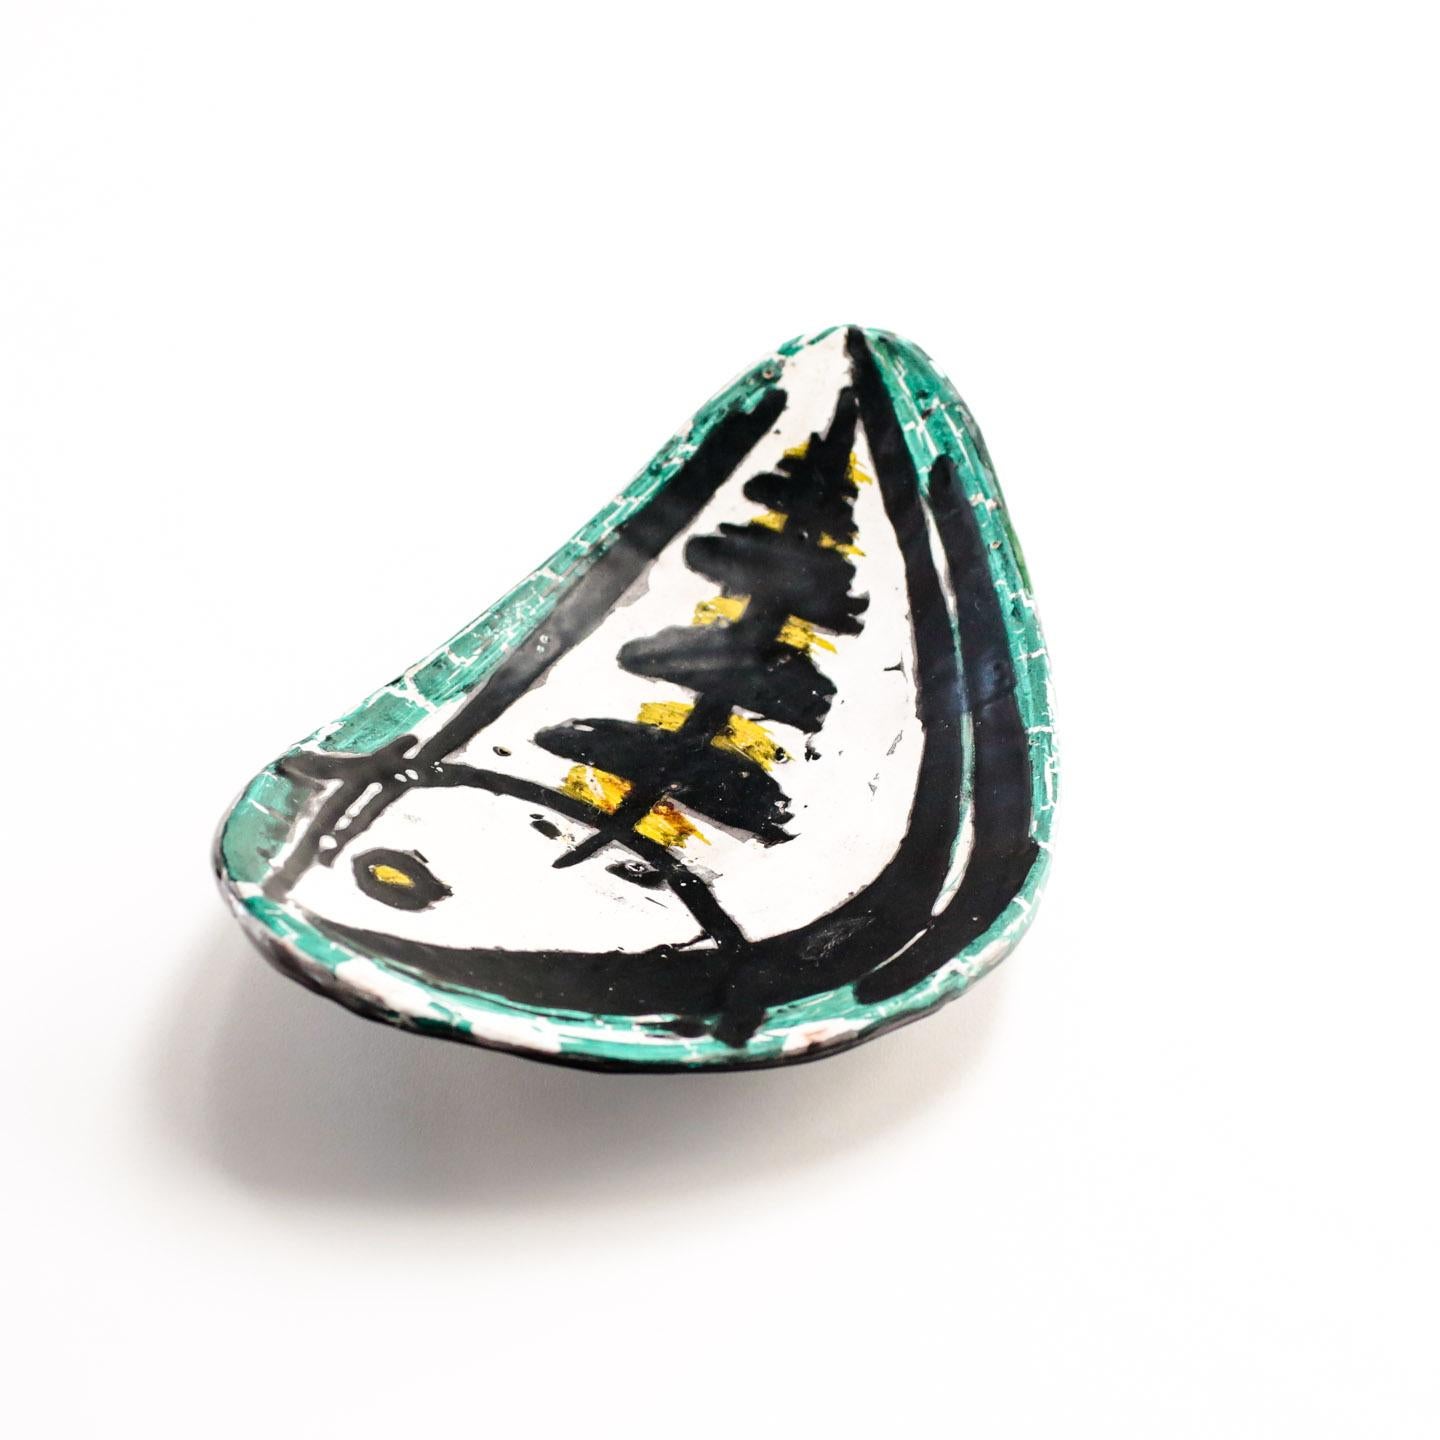 A midcentury art pottery footed dish or plate, hand-painted and glazed with a stylized fish design, signed Livia Gorka, Hungary, circa 1955.